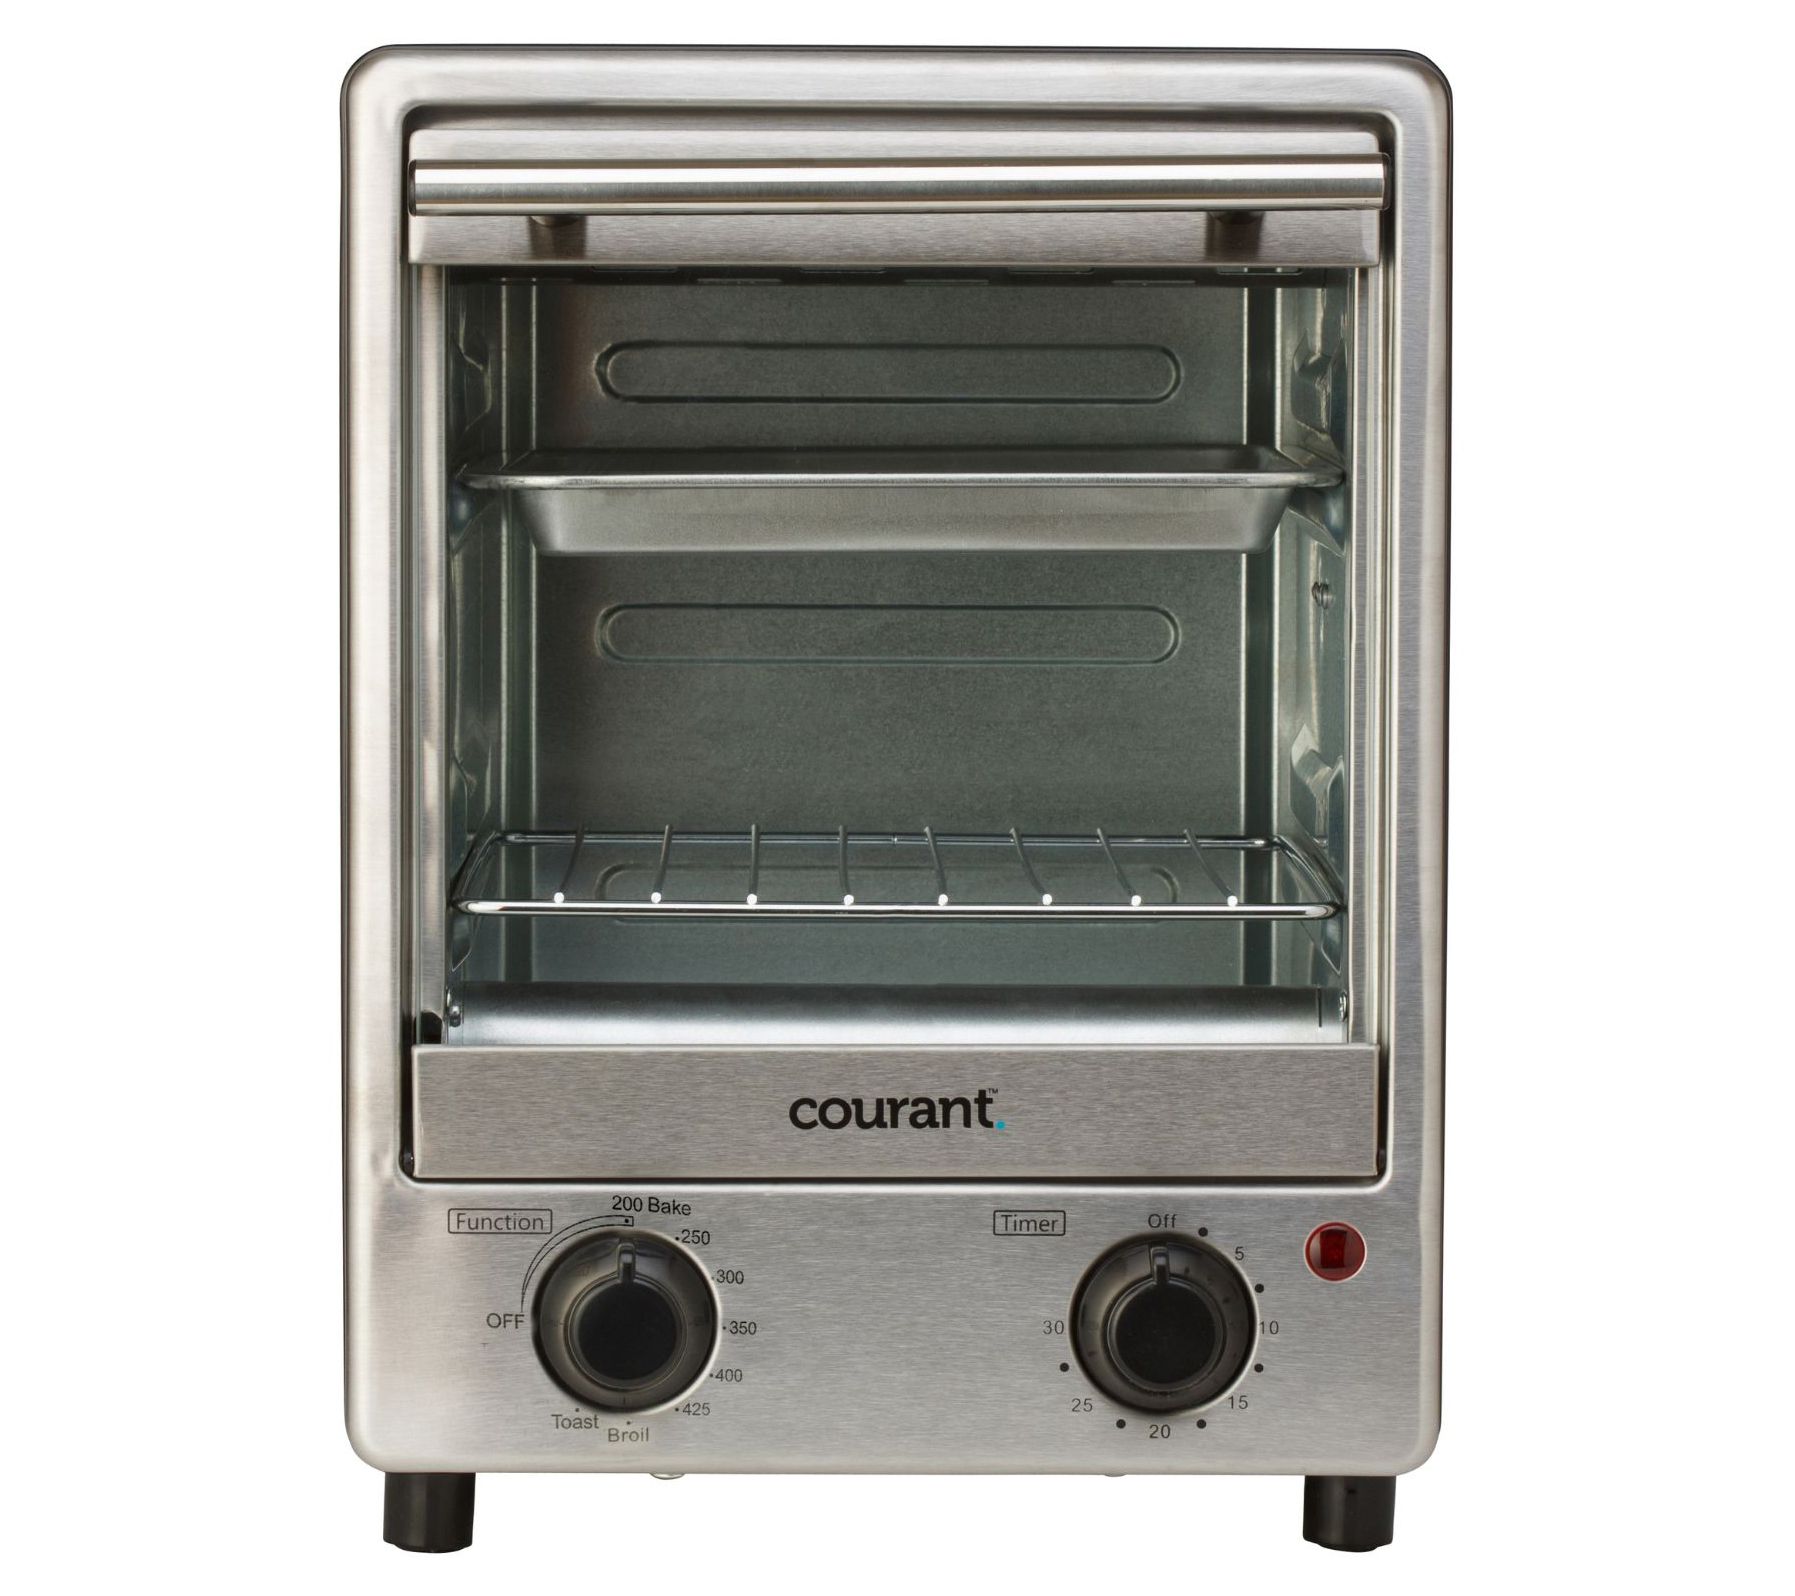 4 Slice Small Toaster Oven Countertop, 12L with 30-Minute Timer, 3